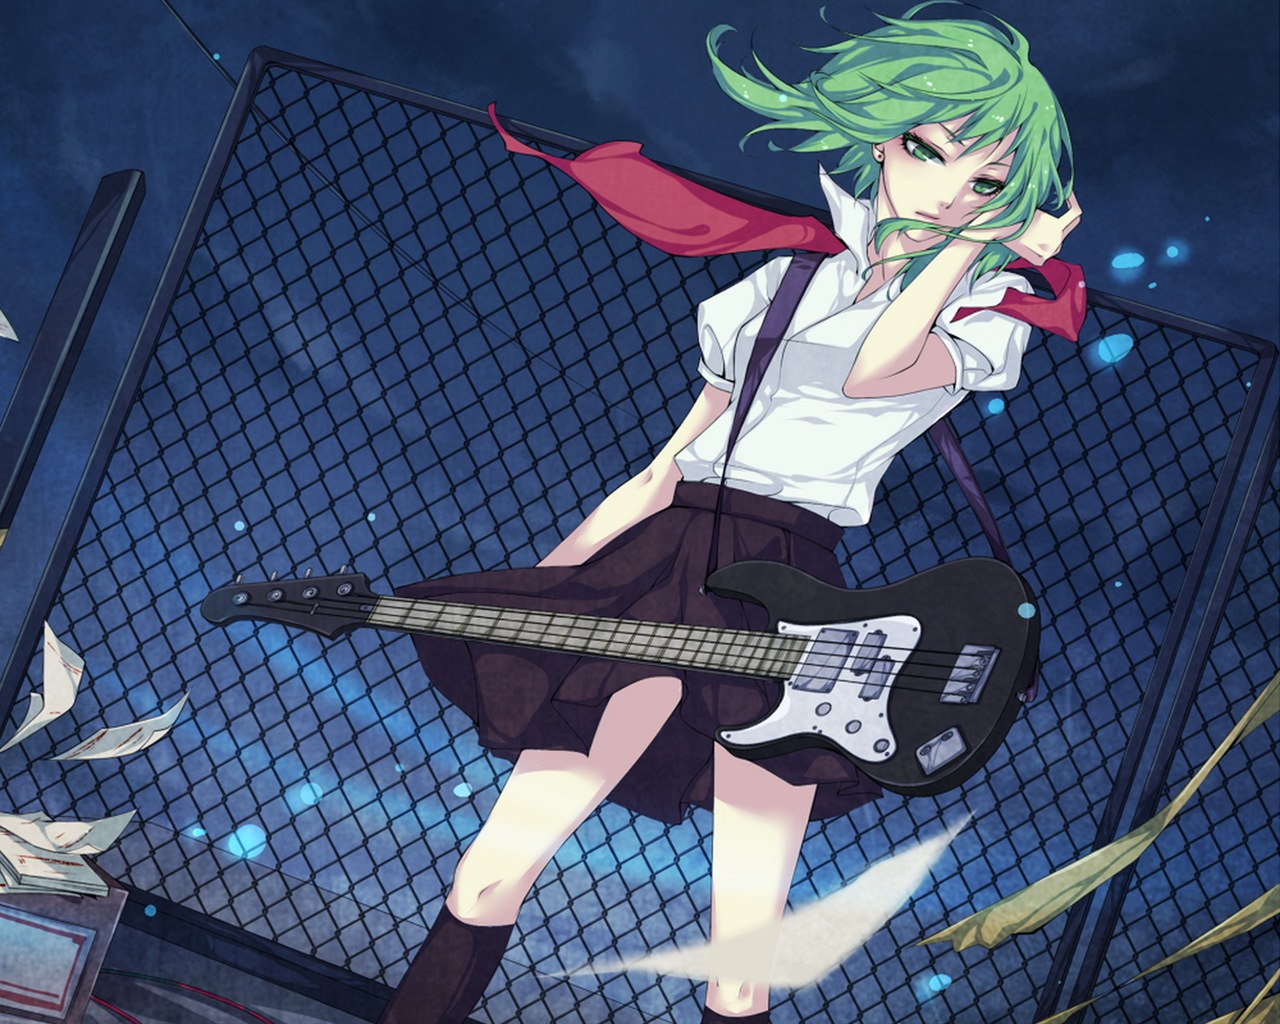 Musique guitare anime girl wallpapers HD #16 - 1280x1024